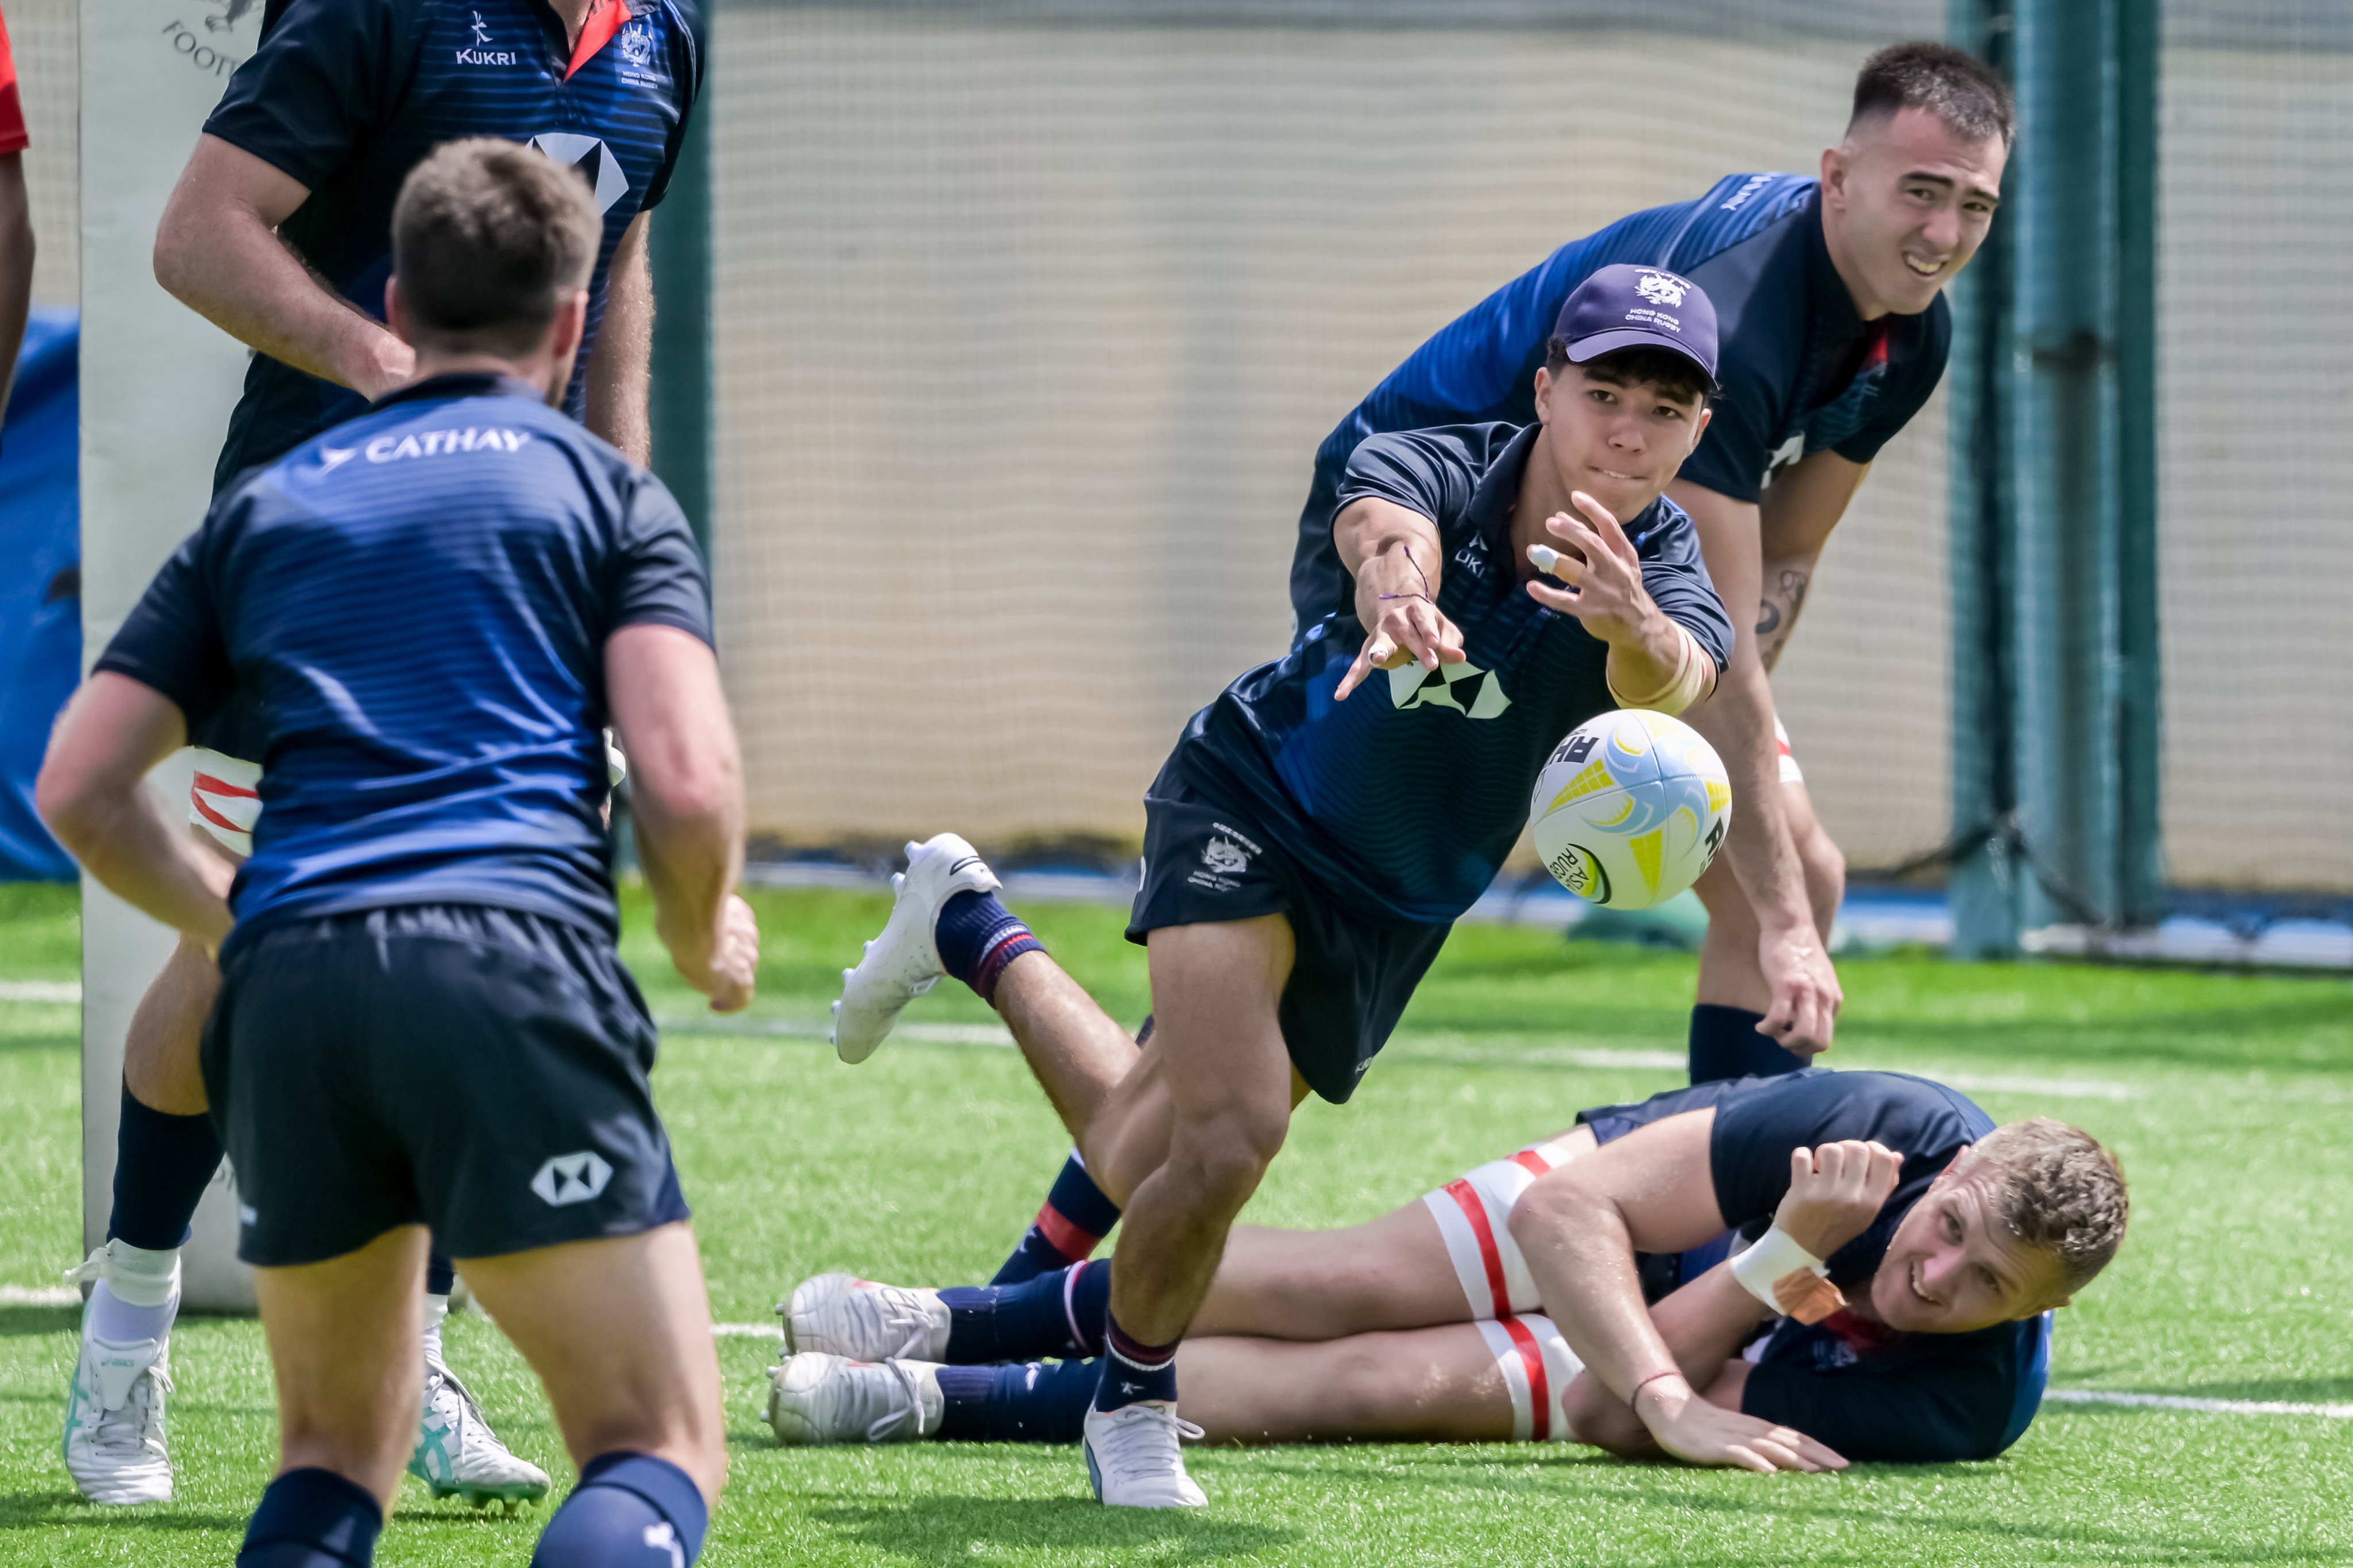 Hong Kong are hoping to play expansively against South Korea as they target a fifth straight ARC title ahead of next month’s three-match tour to South America. Photo: HKRU